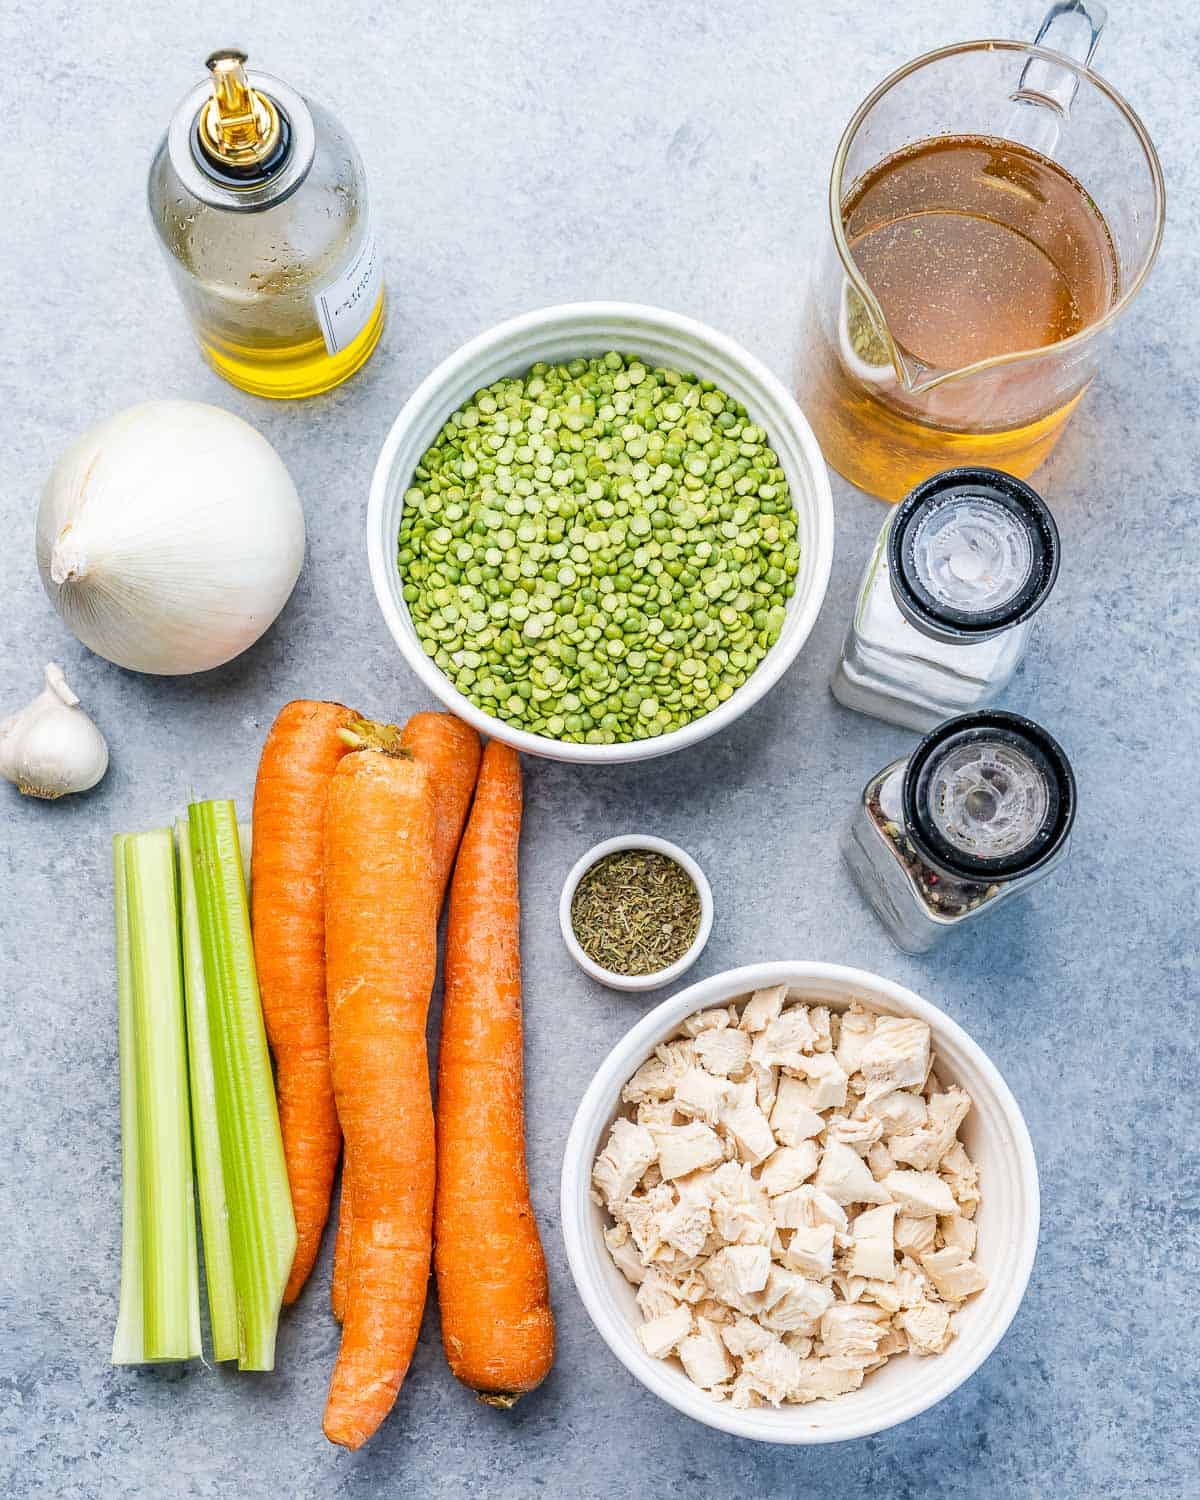 Peas, carrots, celery, chopped chicken and broth.